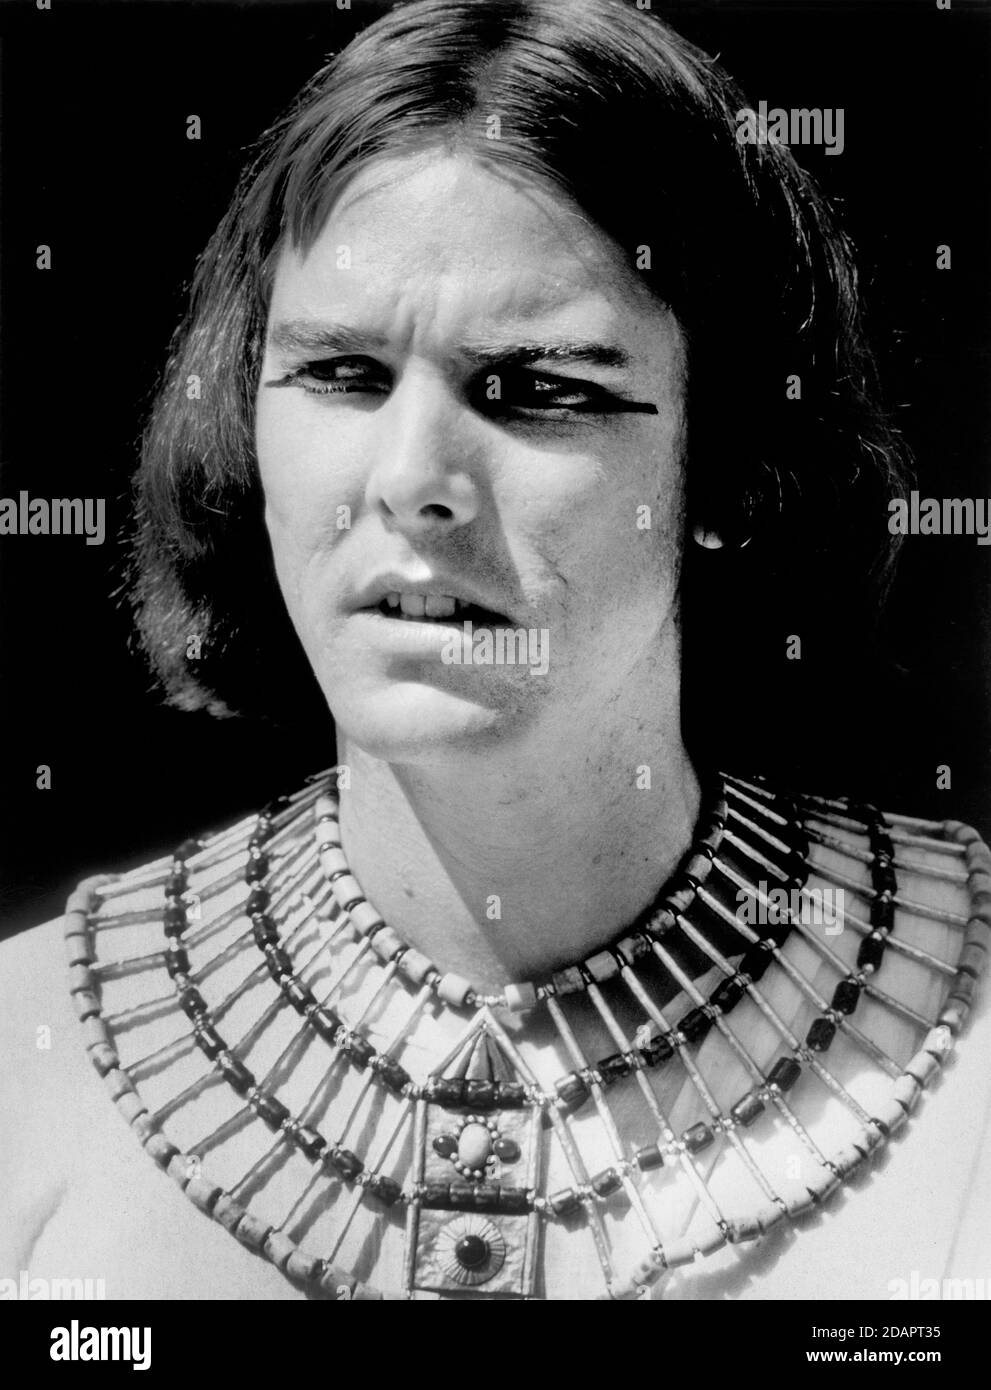 William Lancaster, Publicity Portrait for the TV Drama Series, 'Moses, the Lawgiver', CBS-TV, 1975 Stock Photo